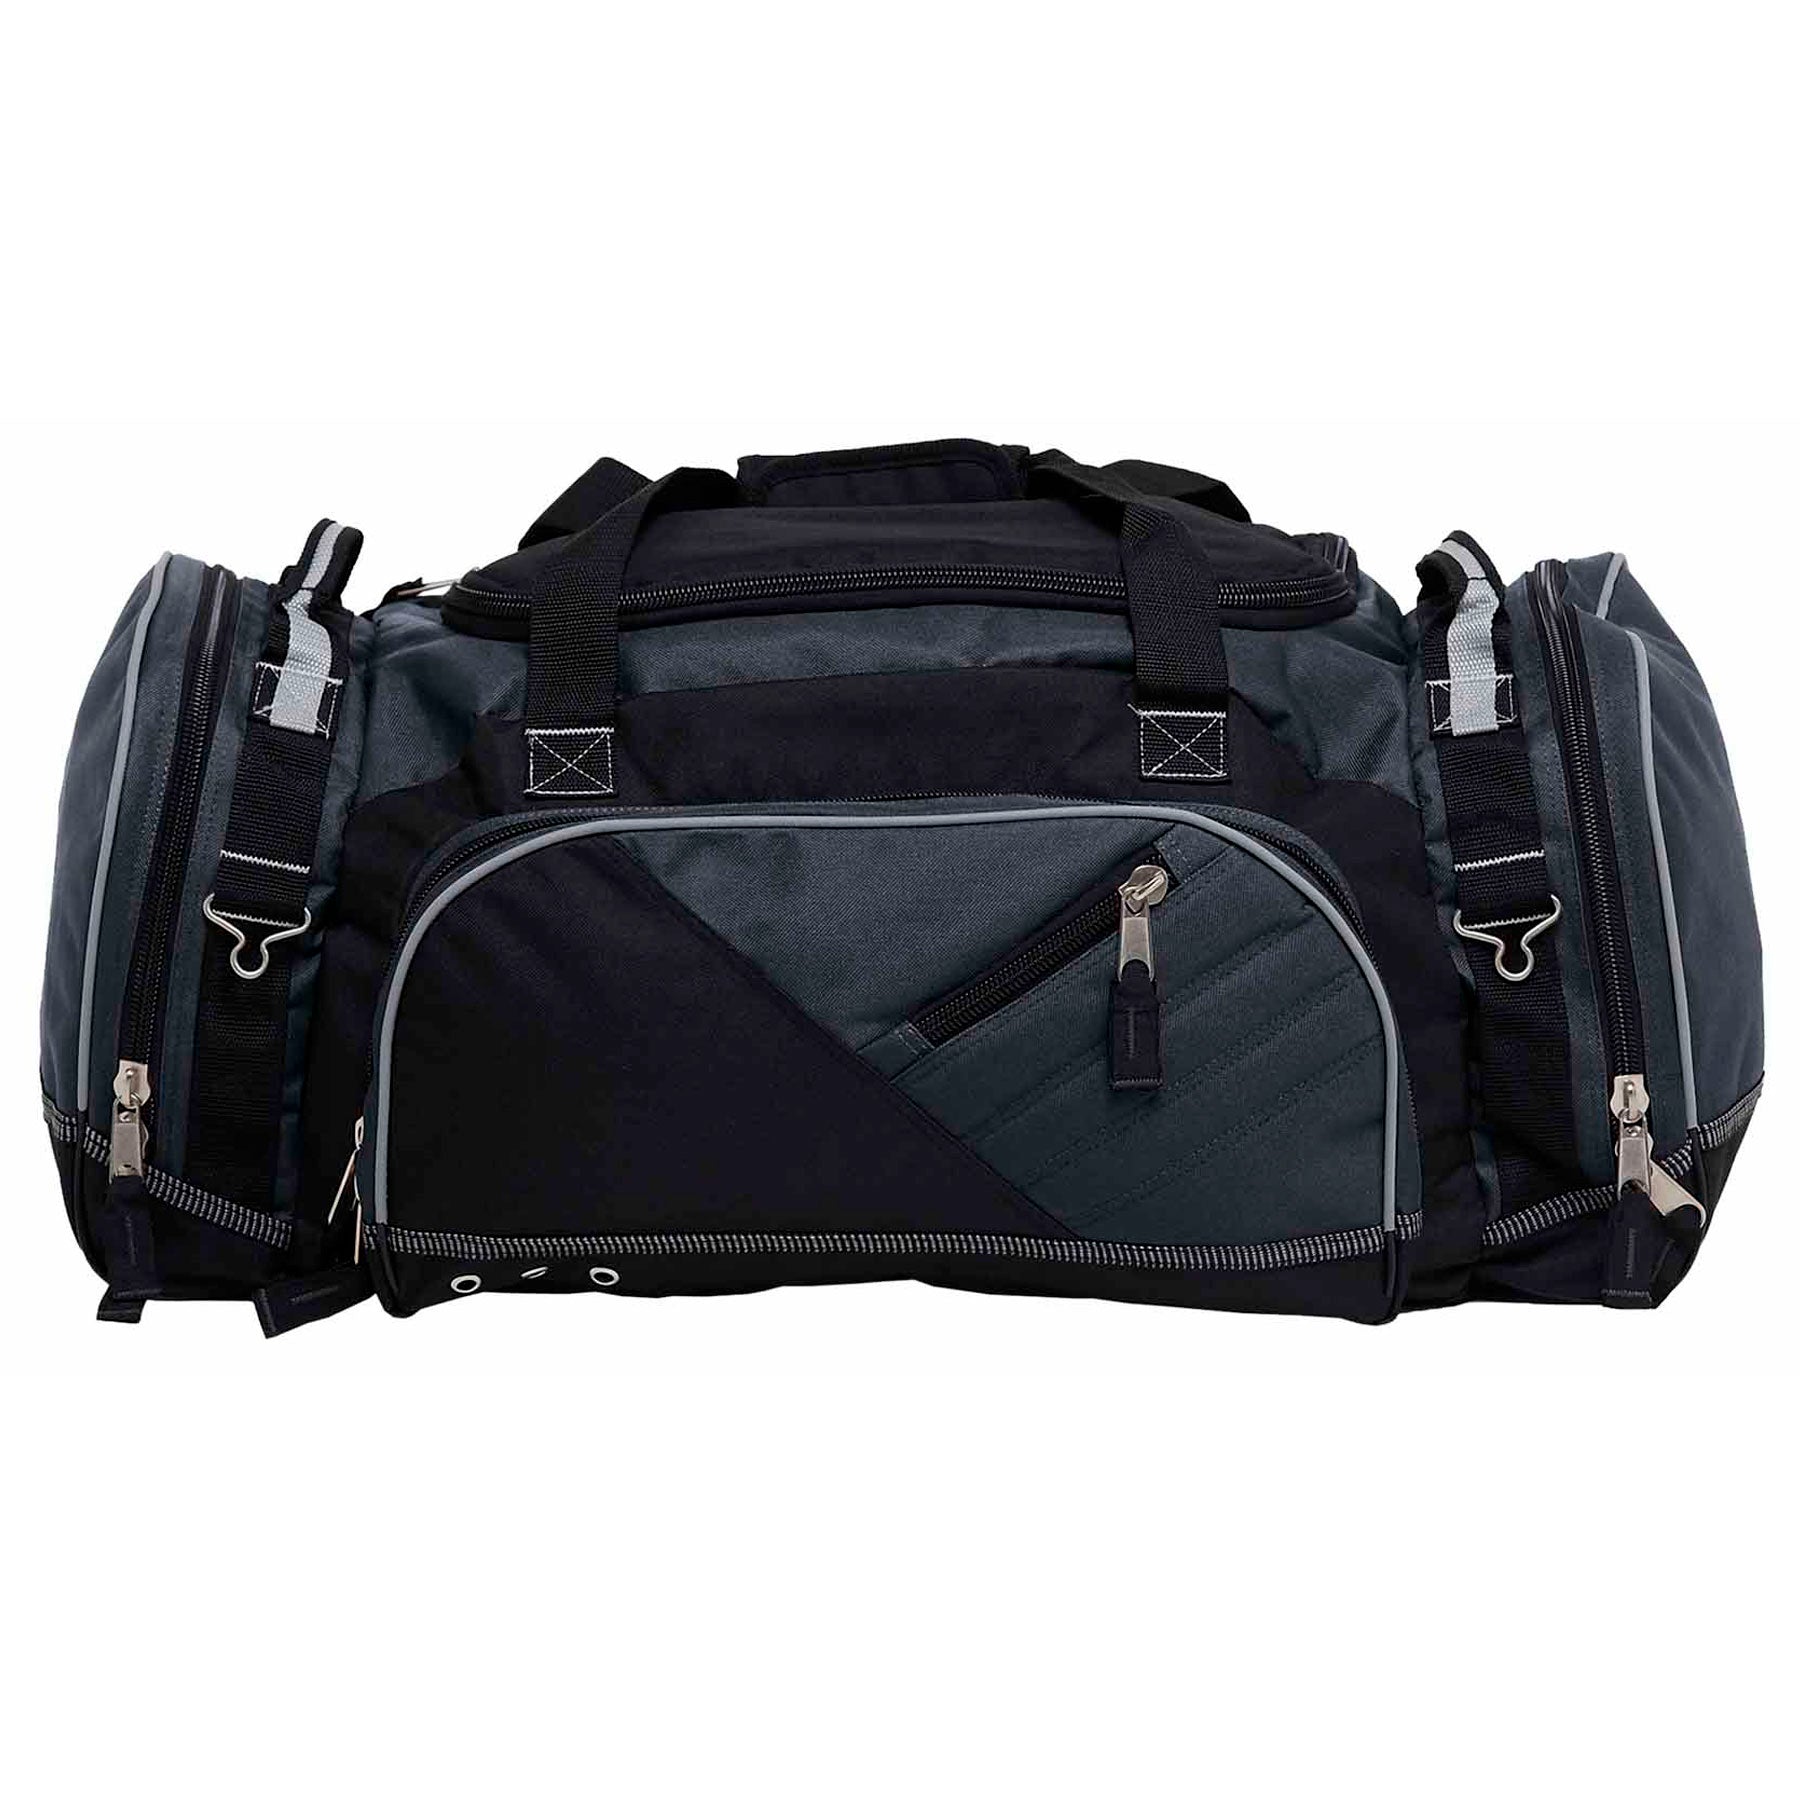 The Recon Sports Duffle Bag